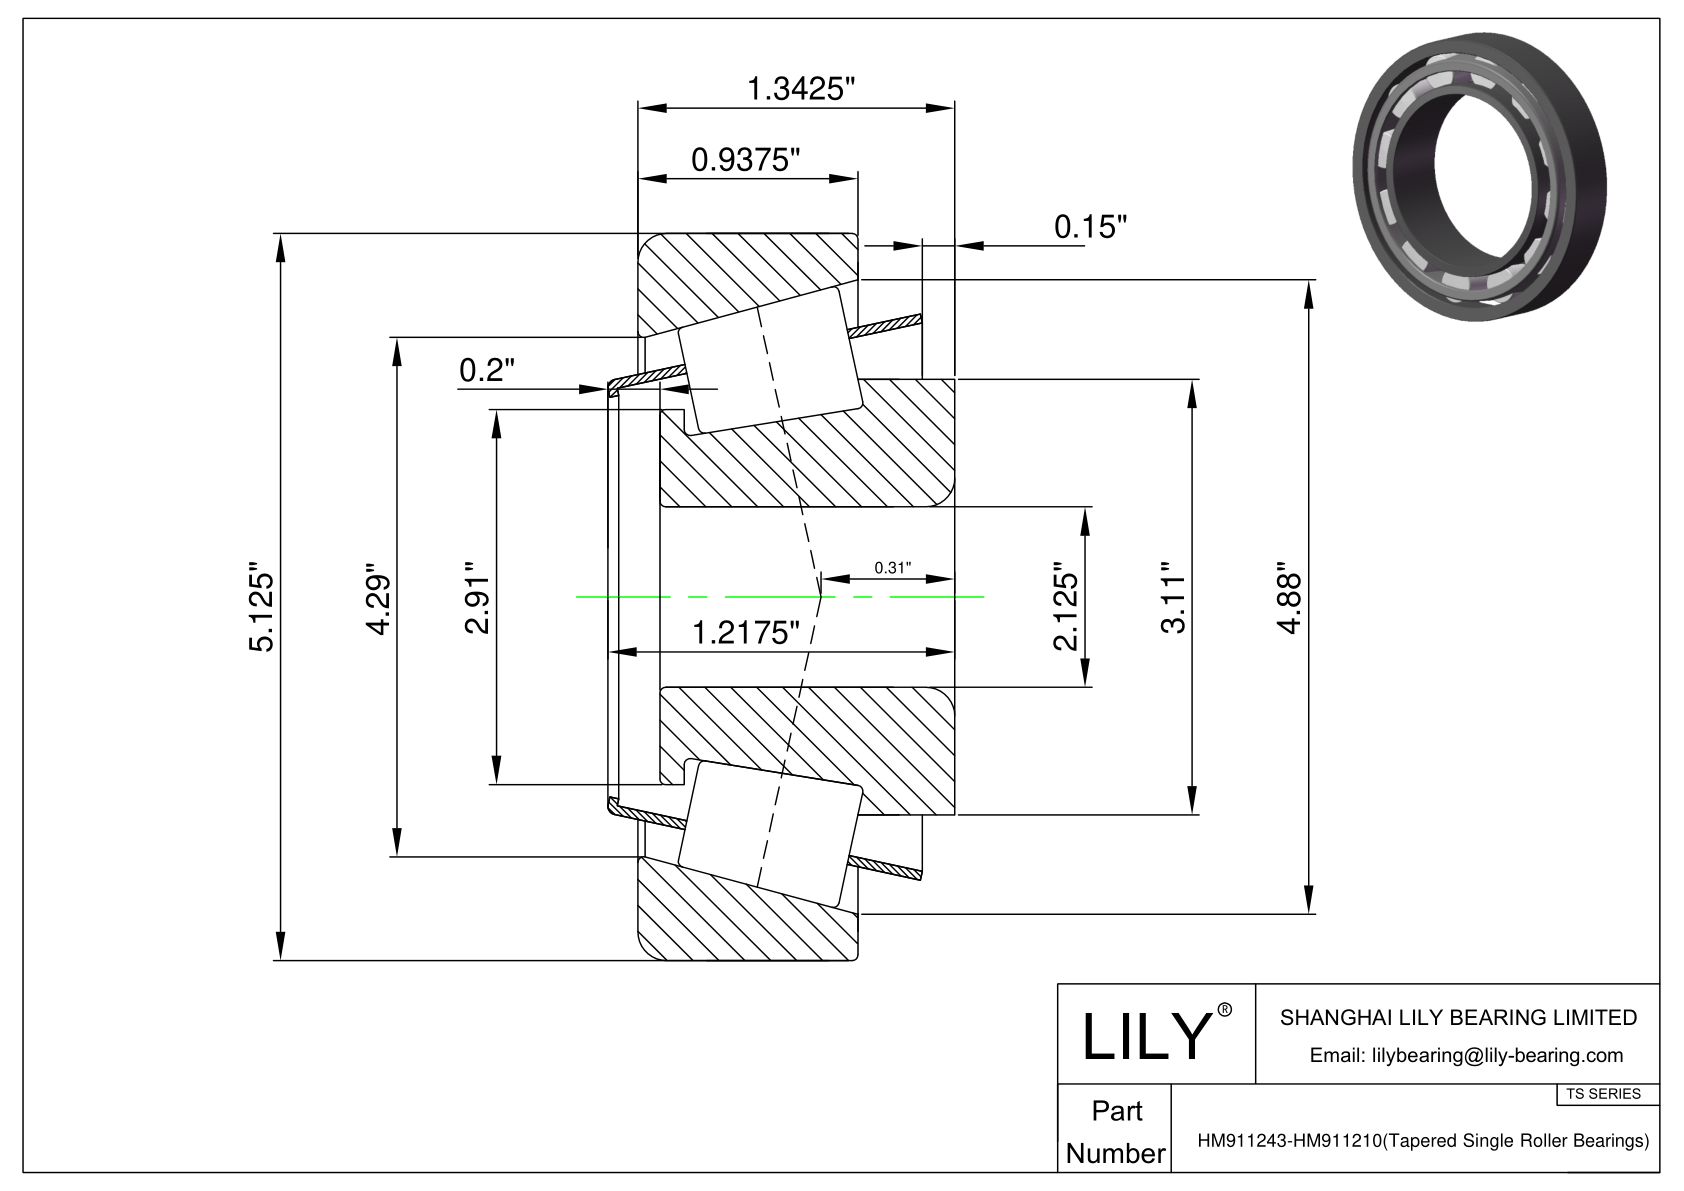 HM911243-HM911210 TS (Tapered Single Roller Bearings) (Imperial) cad drawing